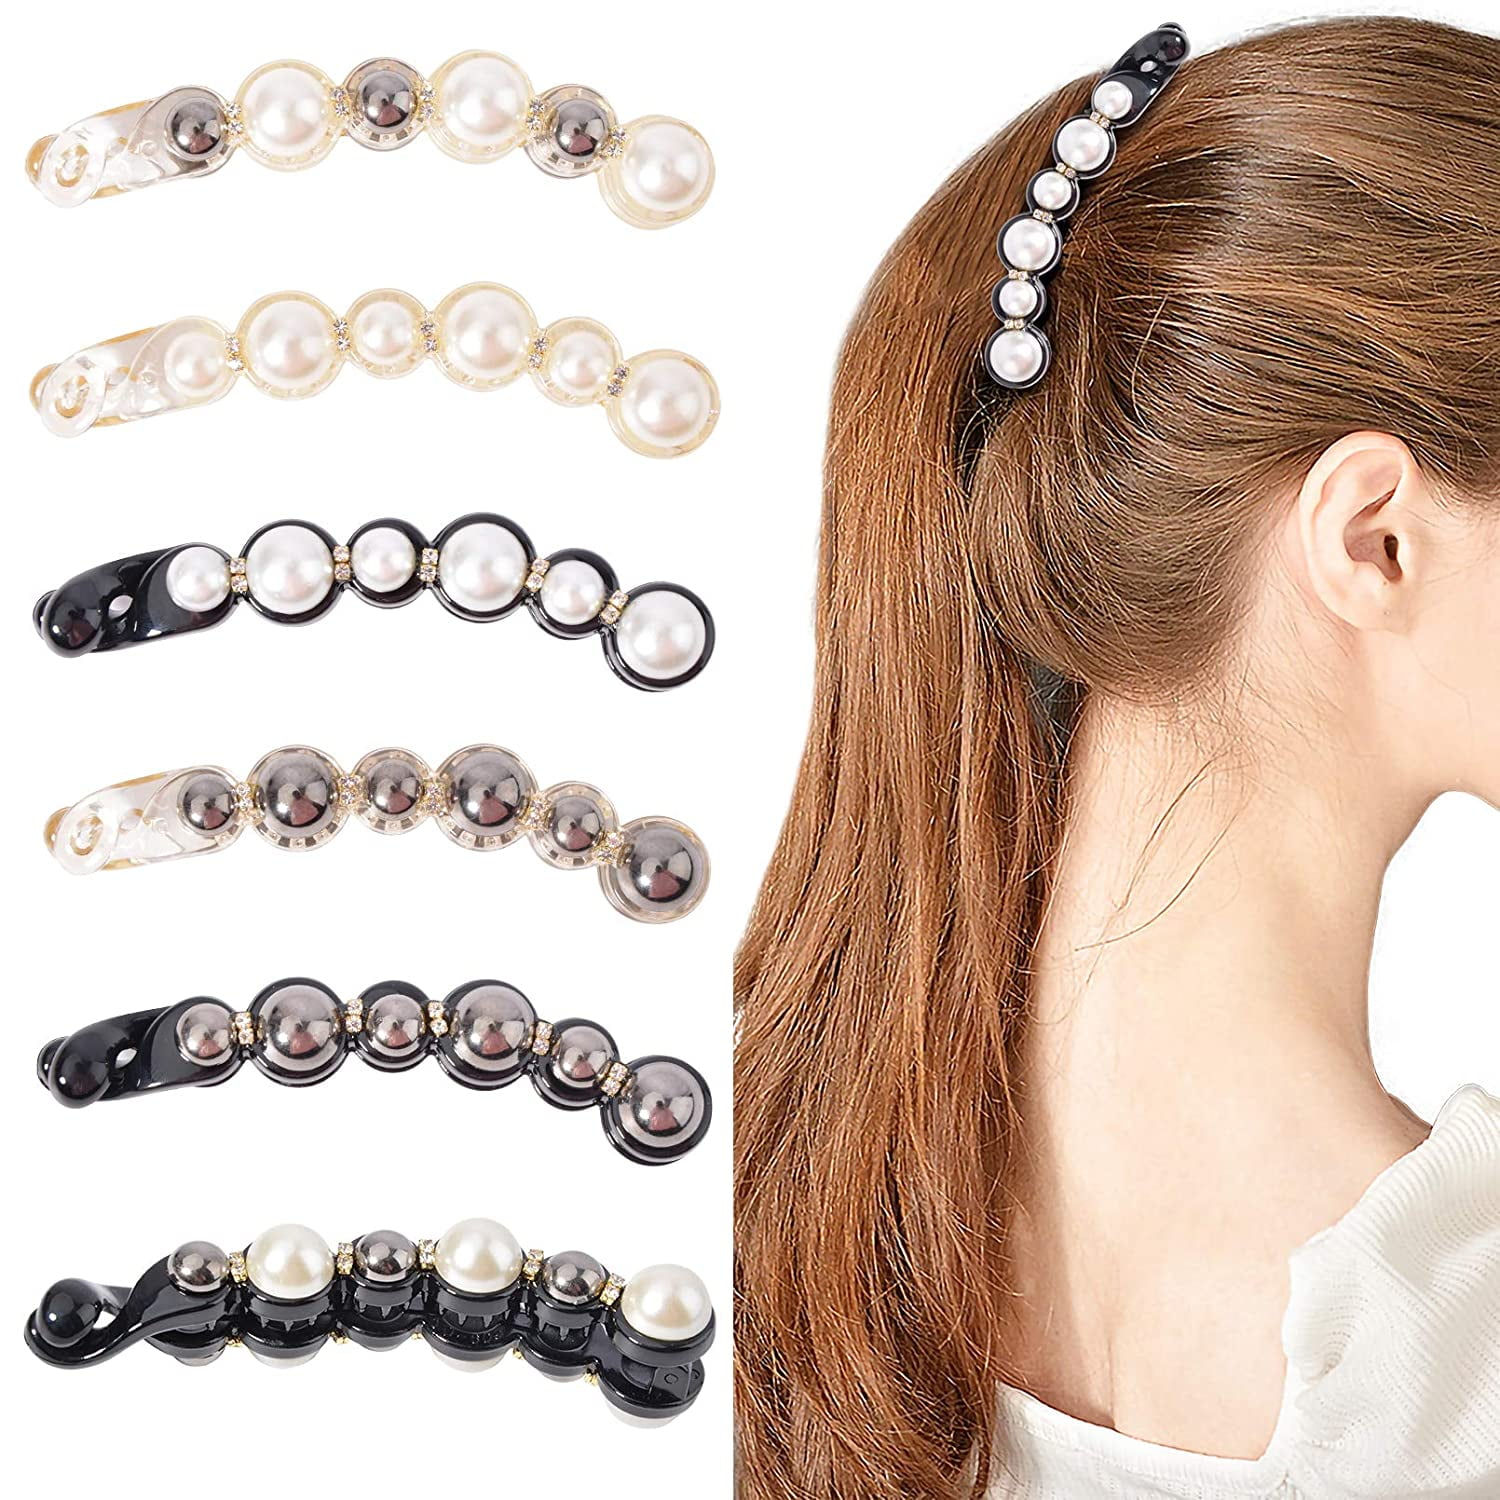 Bead Faux Pearl Hair Jewelry Claw Jaw Clip Clamp Women Accessory AL